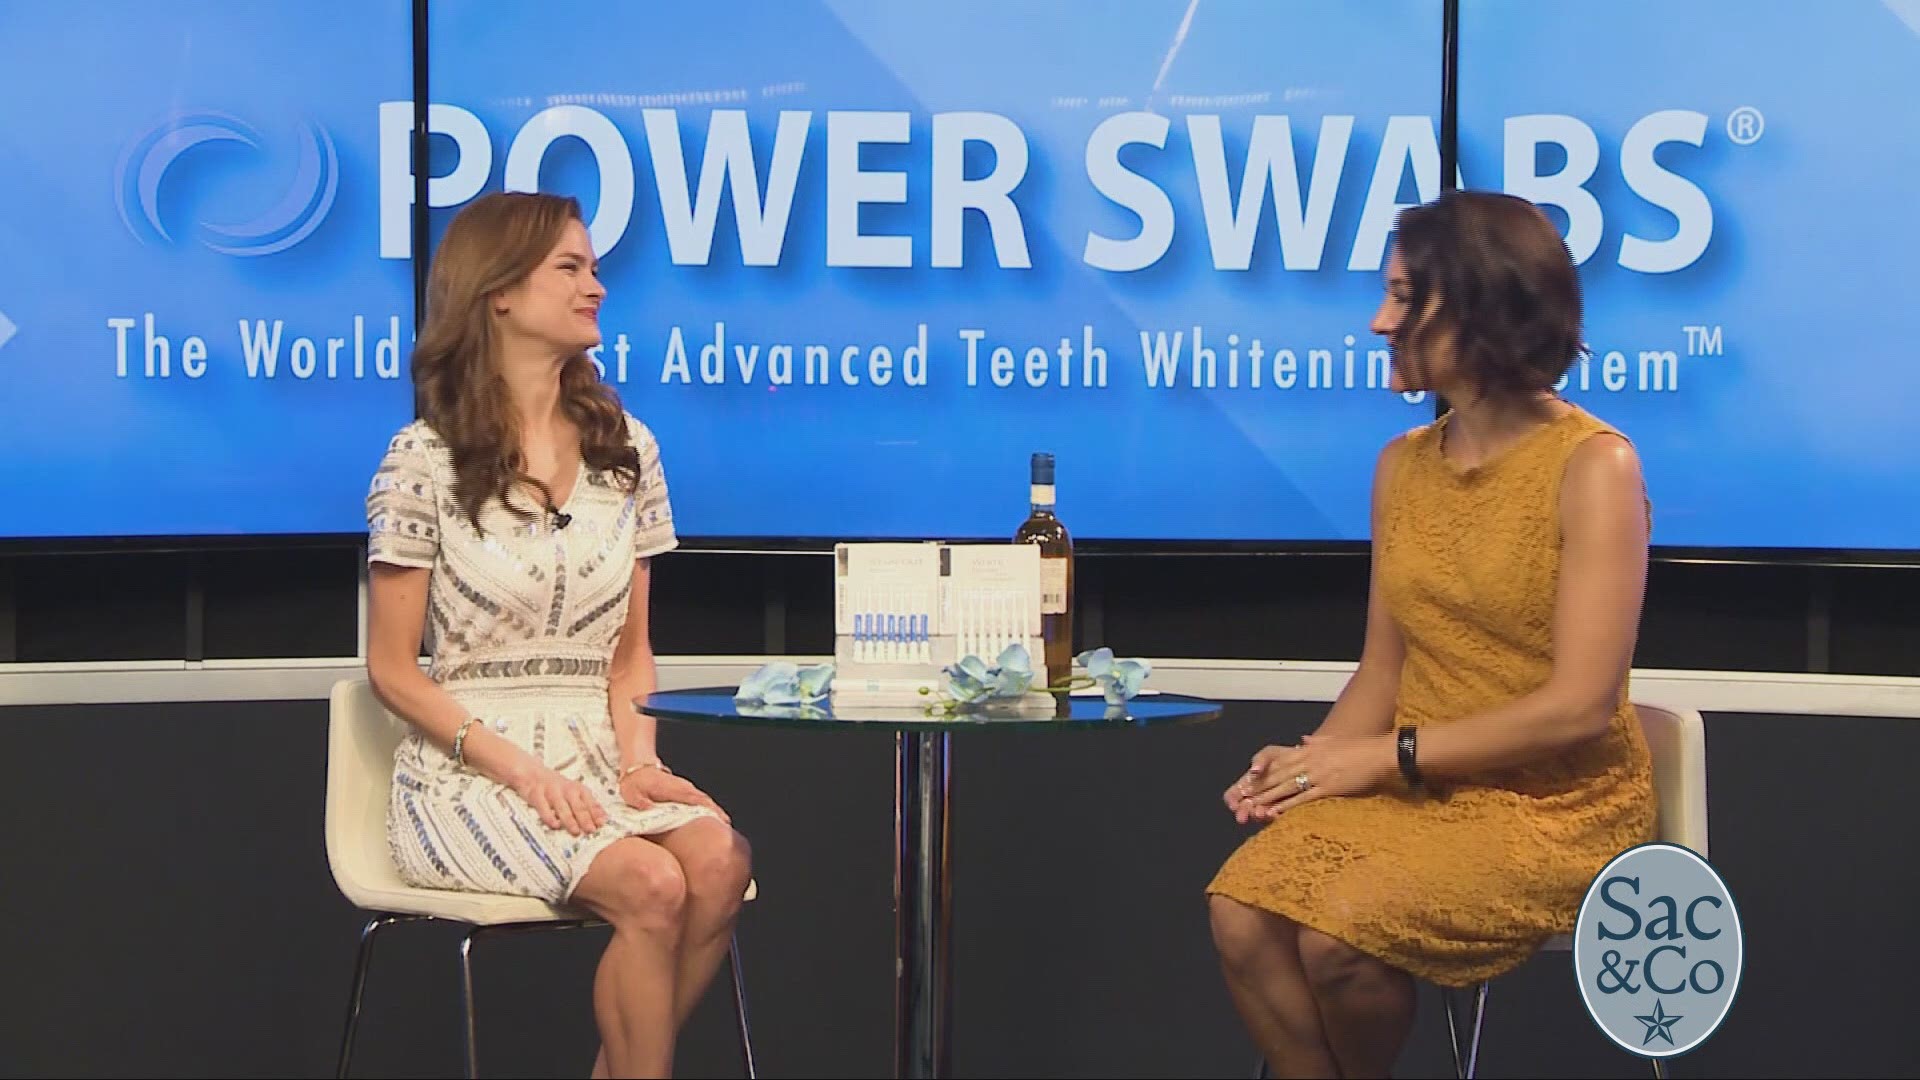 See how Power Swabs could possibly whiten that smile in no time!